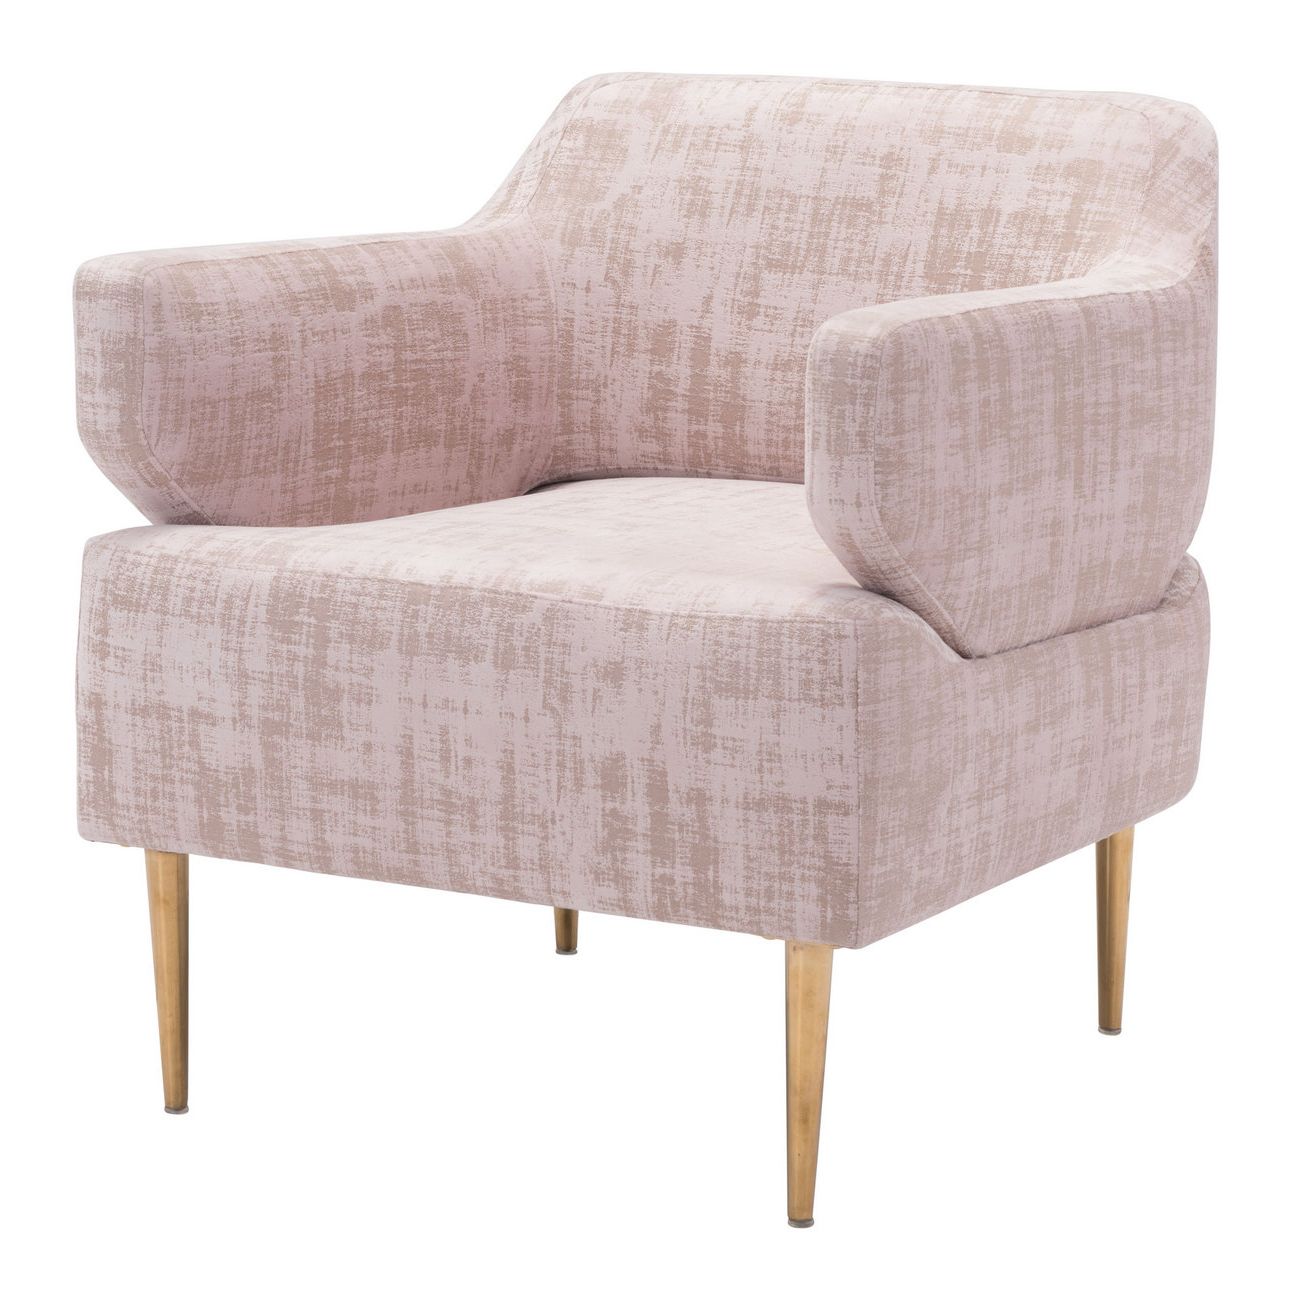 Most Recently Released Didonato Tufted Velvet Armchairs Throughout Oasis Arm Chair In Pink Velvet Zuo Modern  (View 12 of 20)